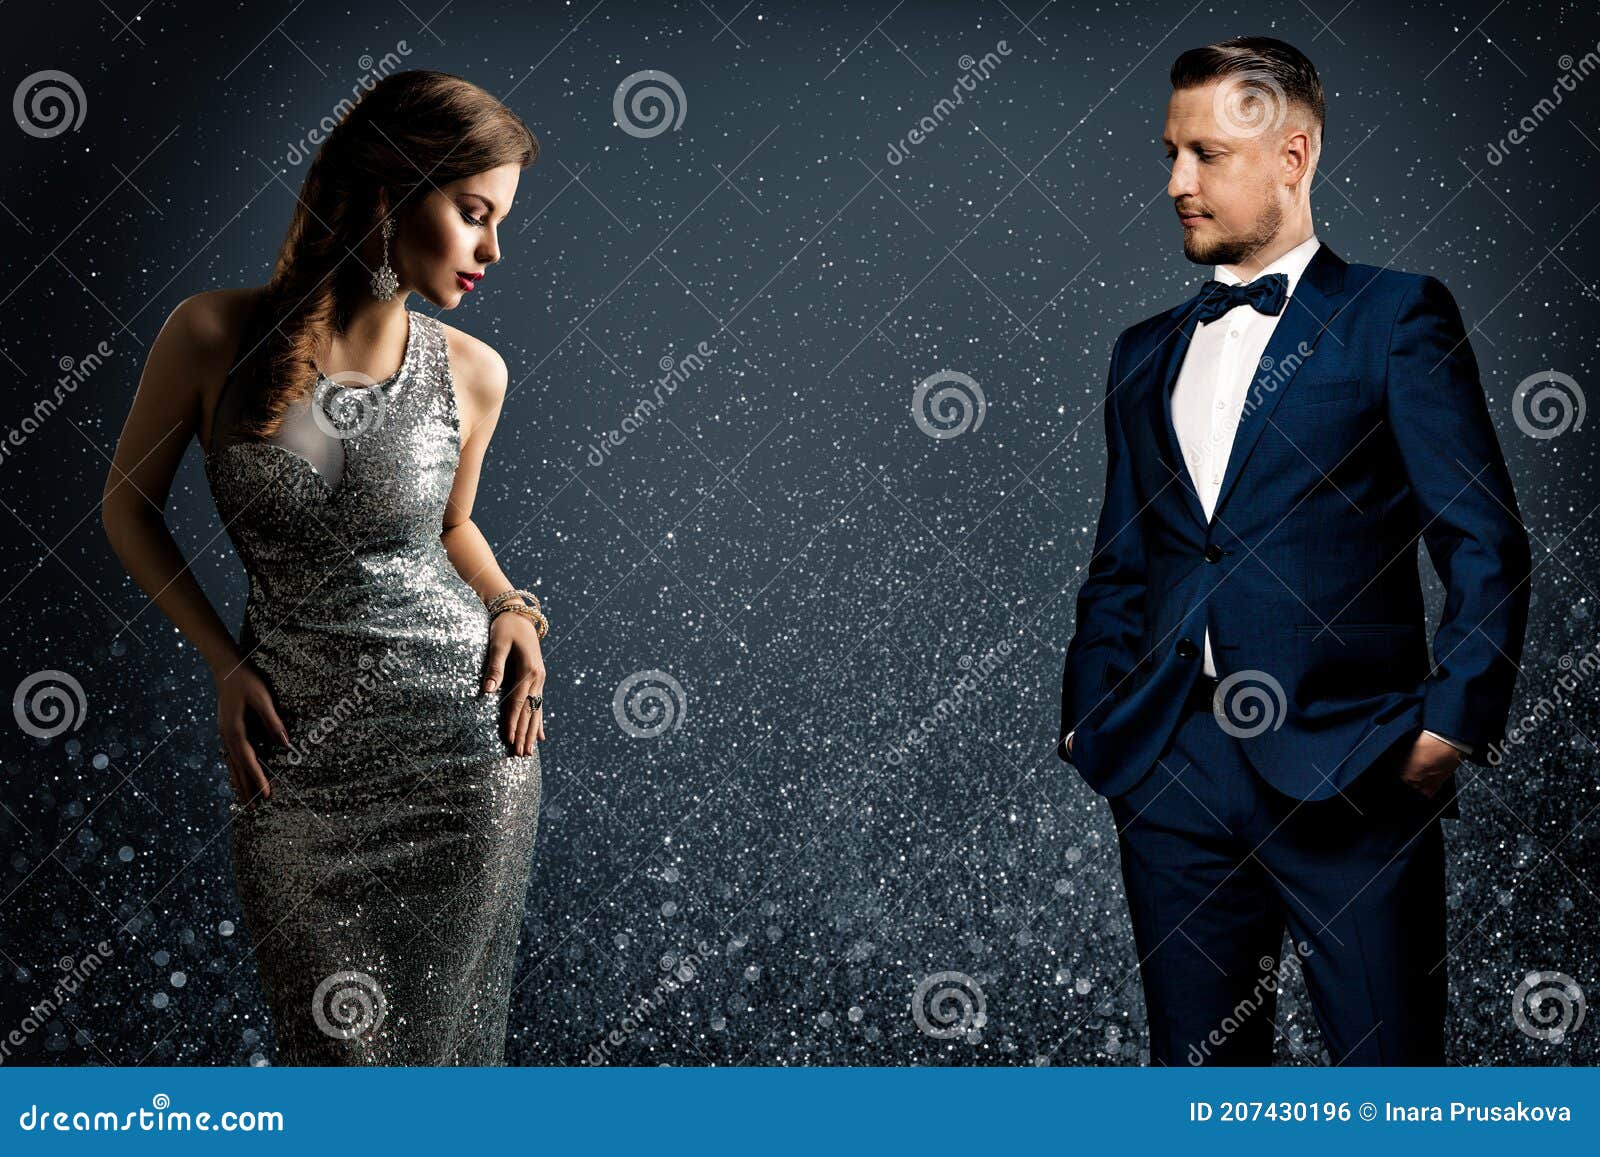 fashion luxury couple. glamour woman and handsome man. elegant pair in evening dress and suit. sparkling background